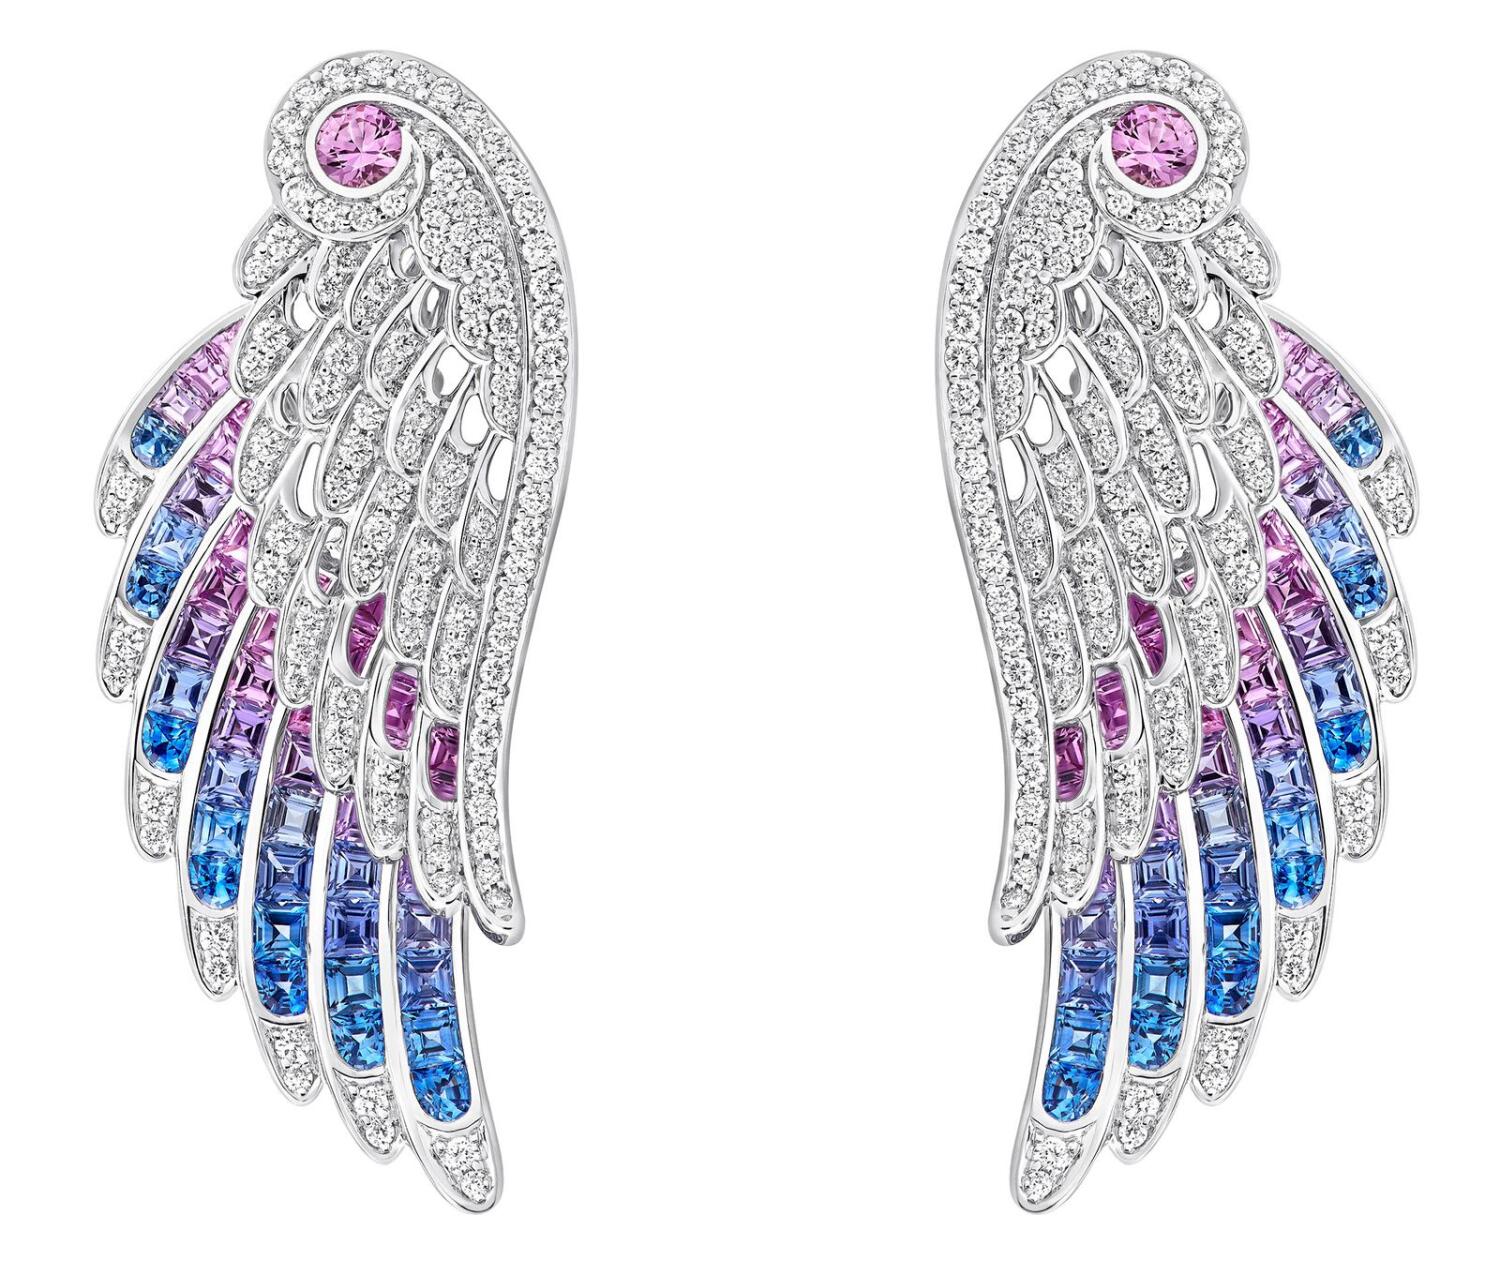 Commemorate Eid with these Wings Embrace Bird of Paradise Drop Earrings from Garrard. Dh135,000